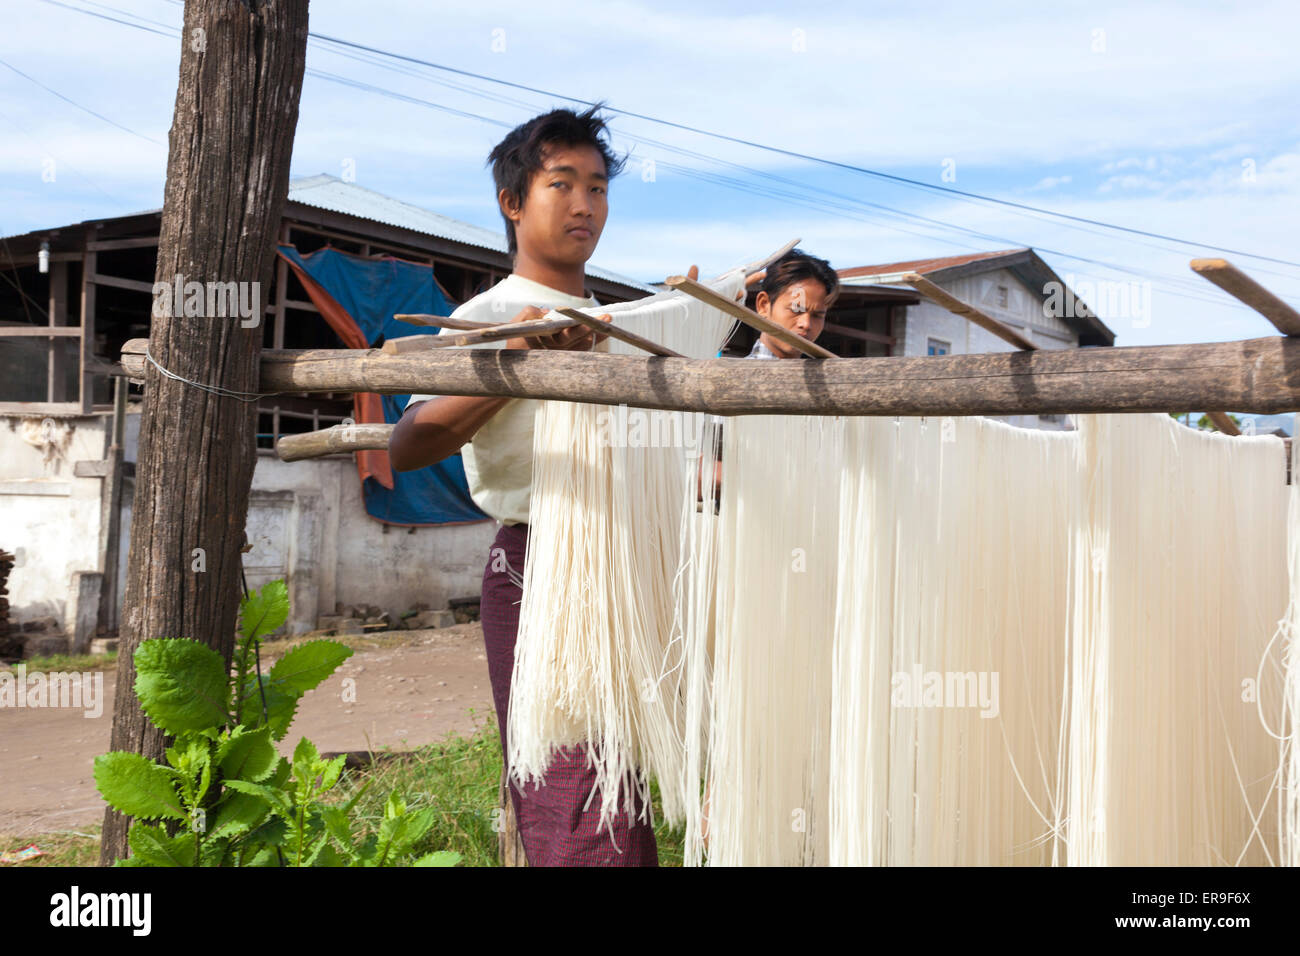 In Hsipaw, Burma, fresh-made rice noodles are hung up on poles to dry in the open air after being made in the buildings behind. Stock Photo